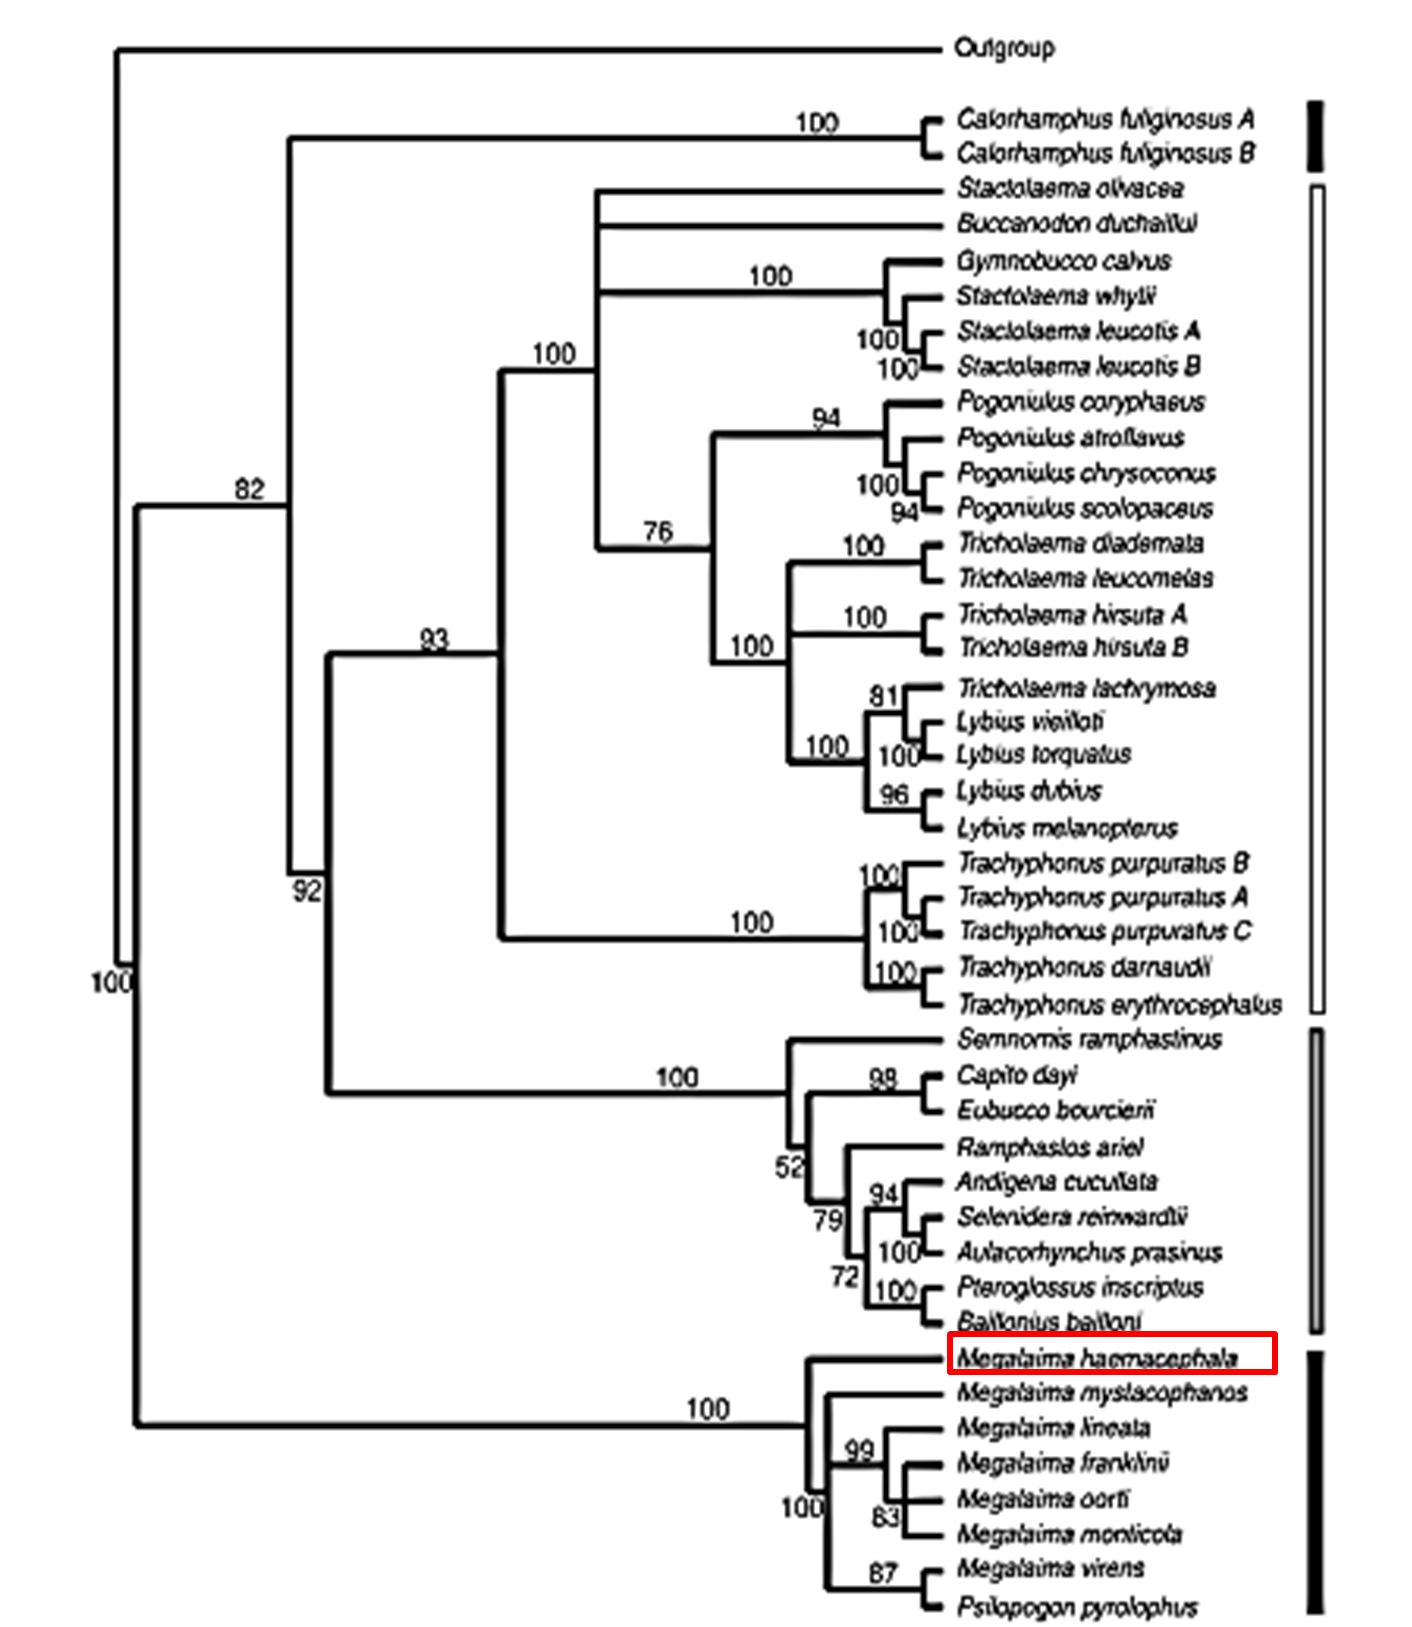 coppersmith barbet phylogeny2.png